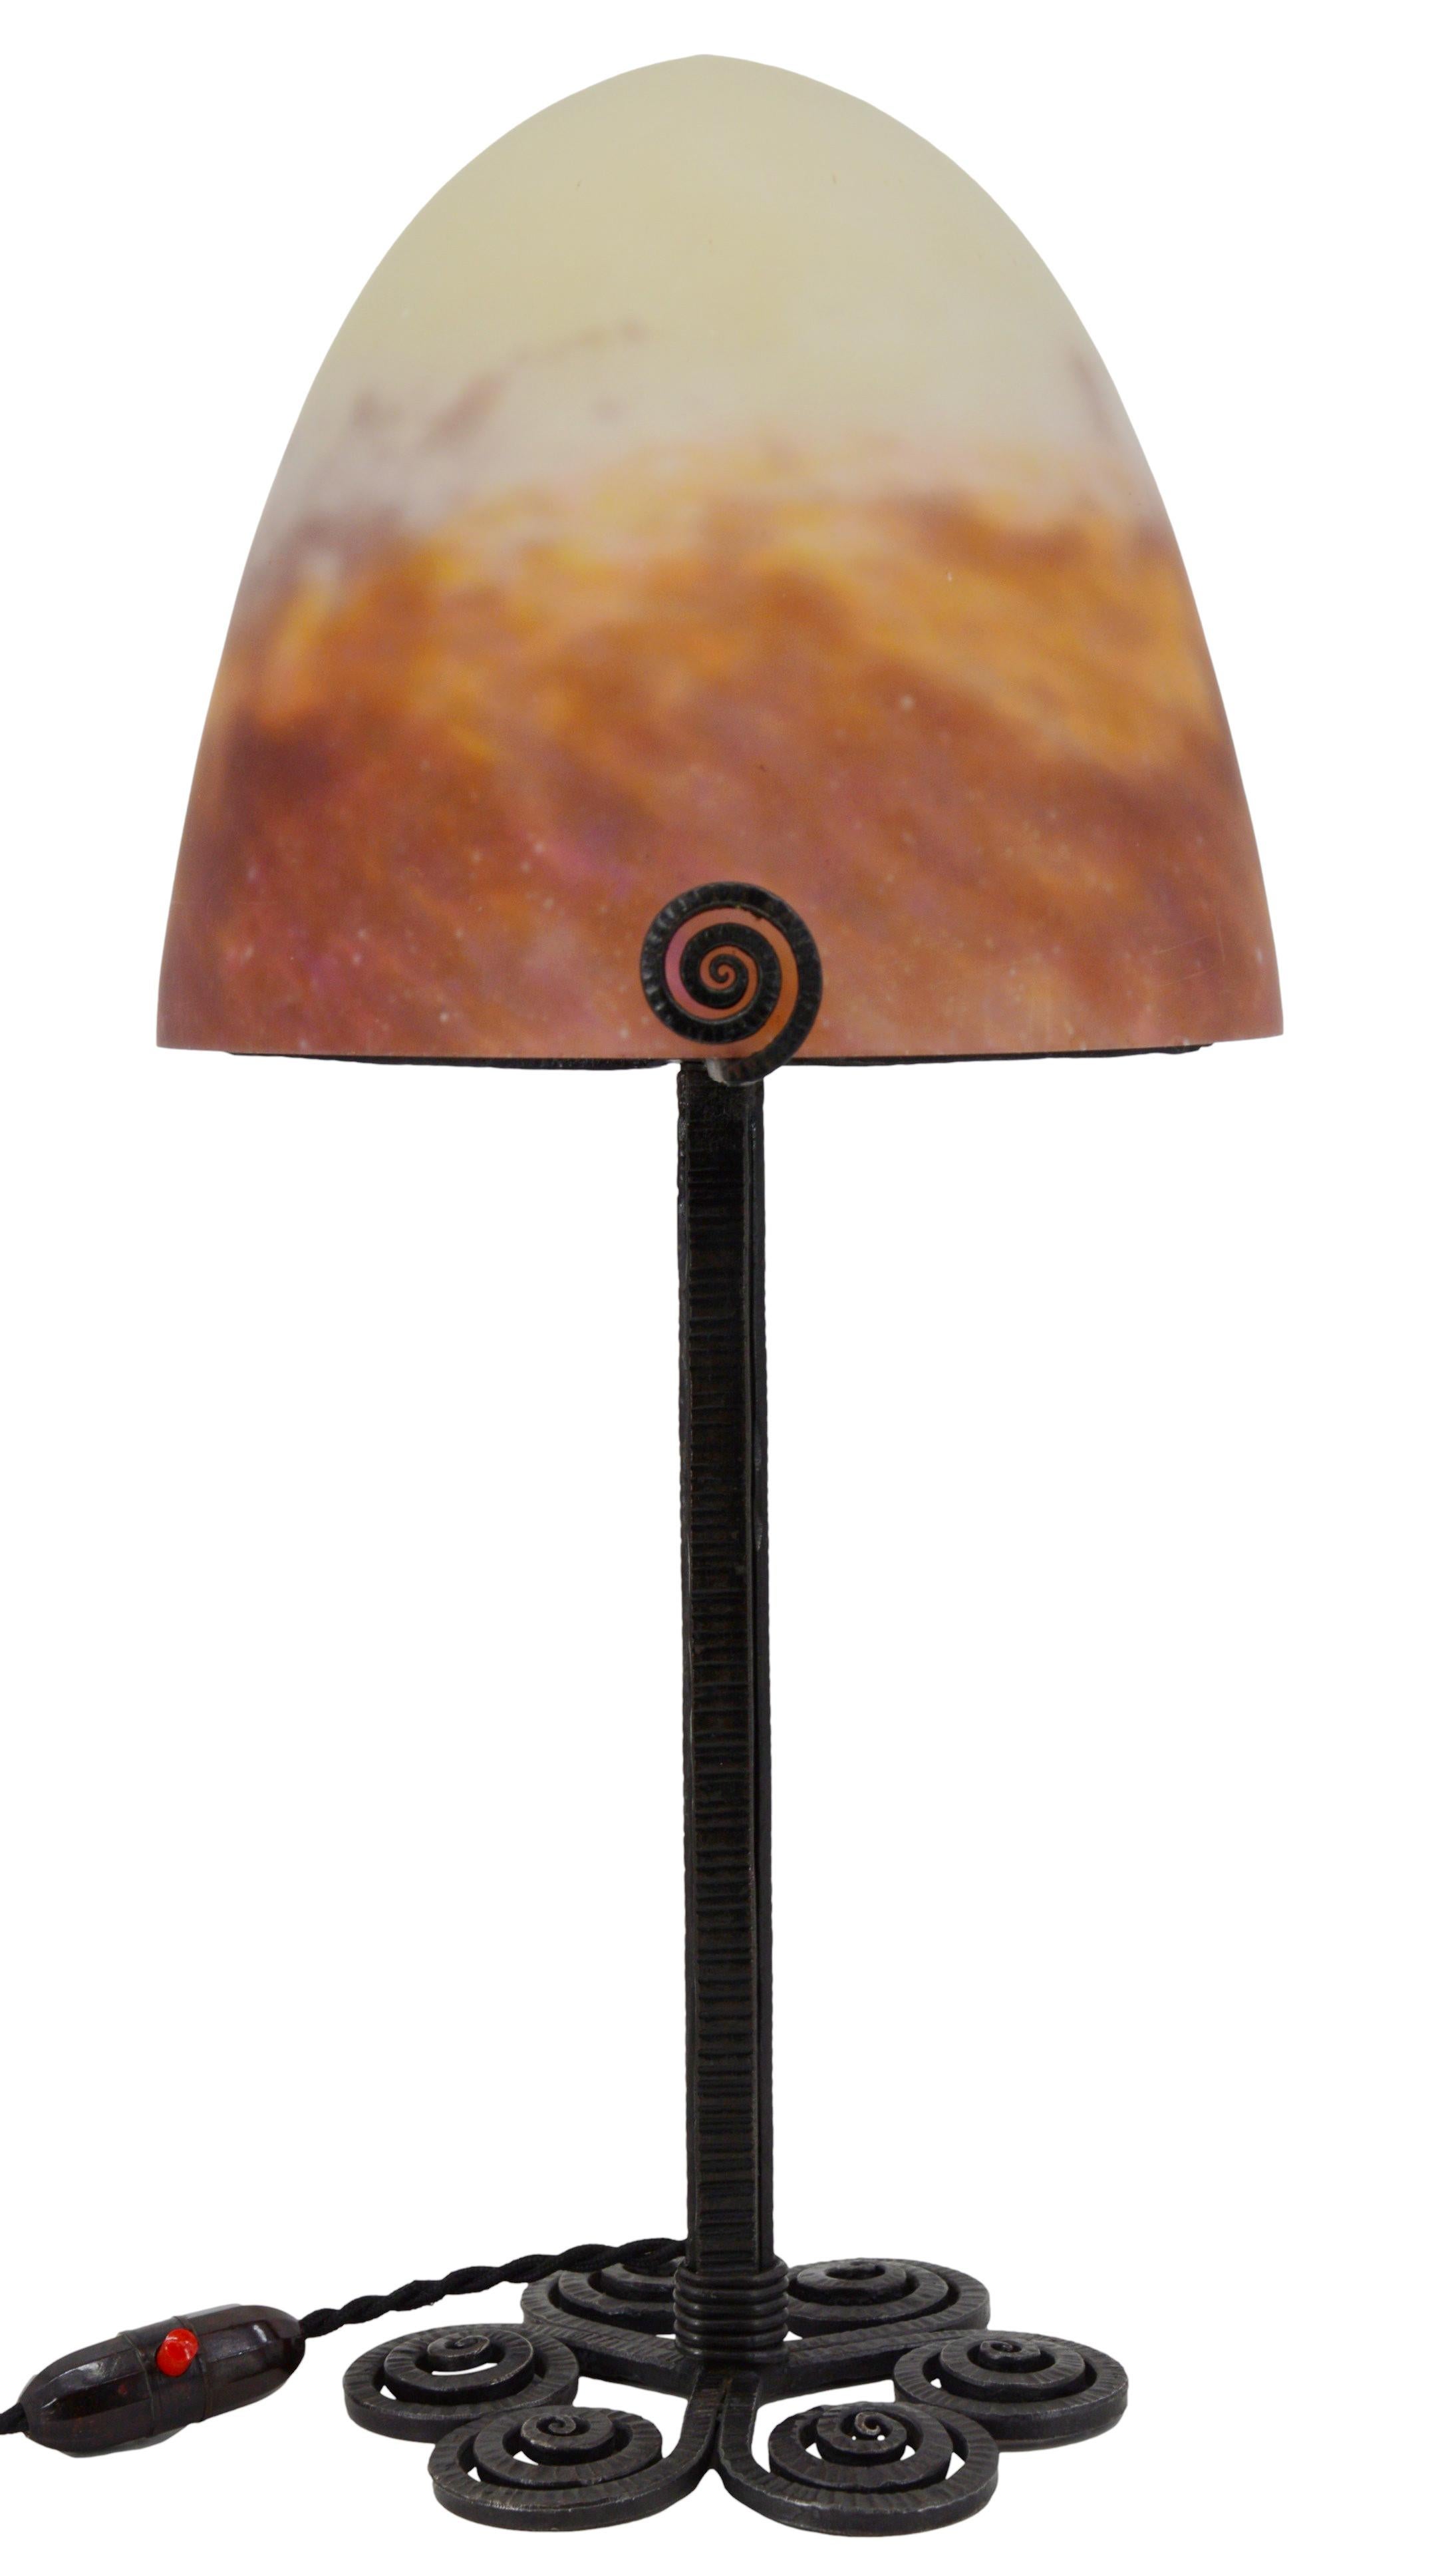 French Art Deco table lamp by Muller Frères, Luneville, France, circa 1925. Mottled glass shade, powders are applied between two layers, cut with the tool, that comes on its classy wrought iron base. Colors: purple, old rose and pale yellow. The top